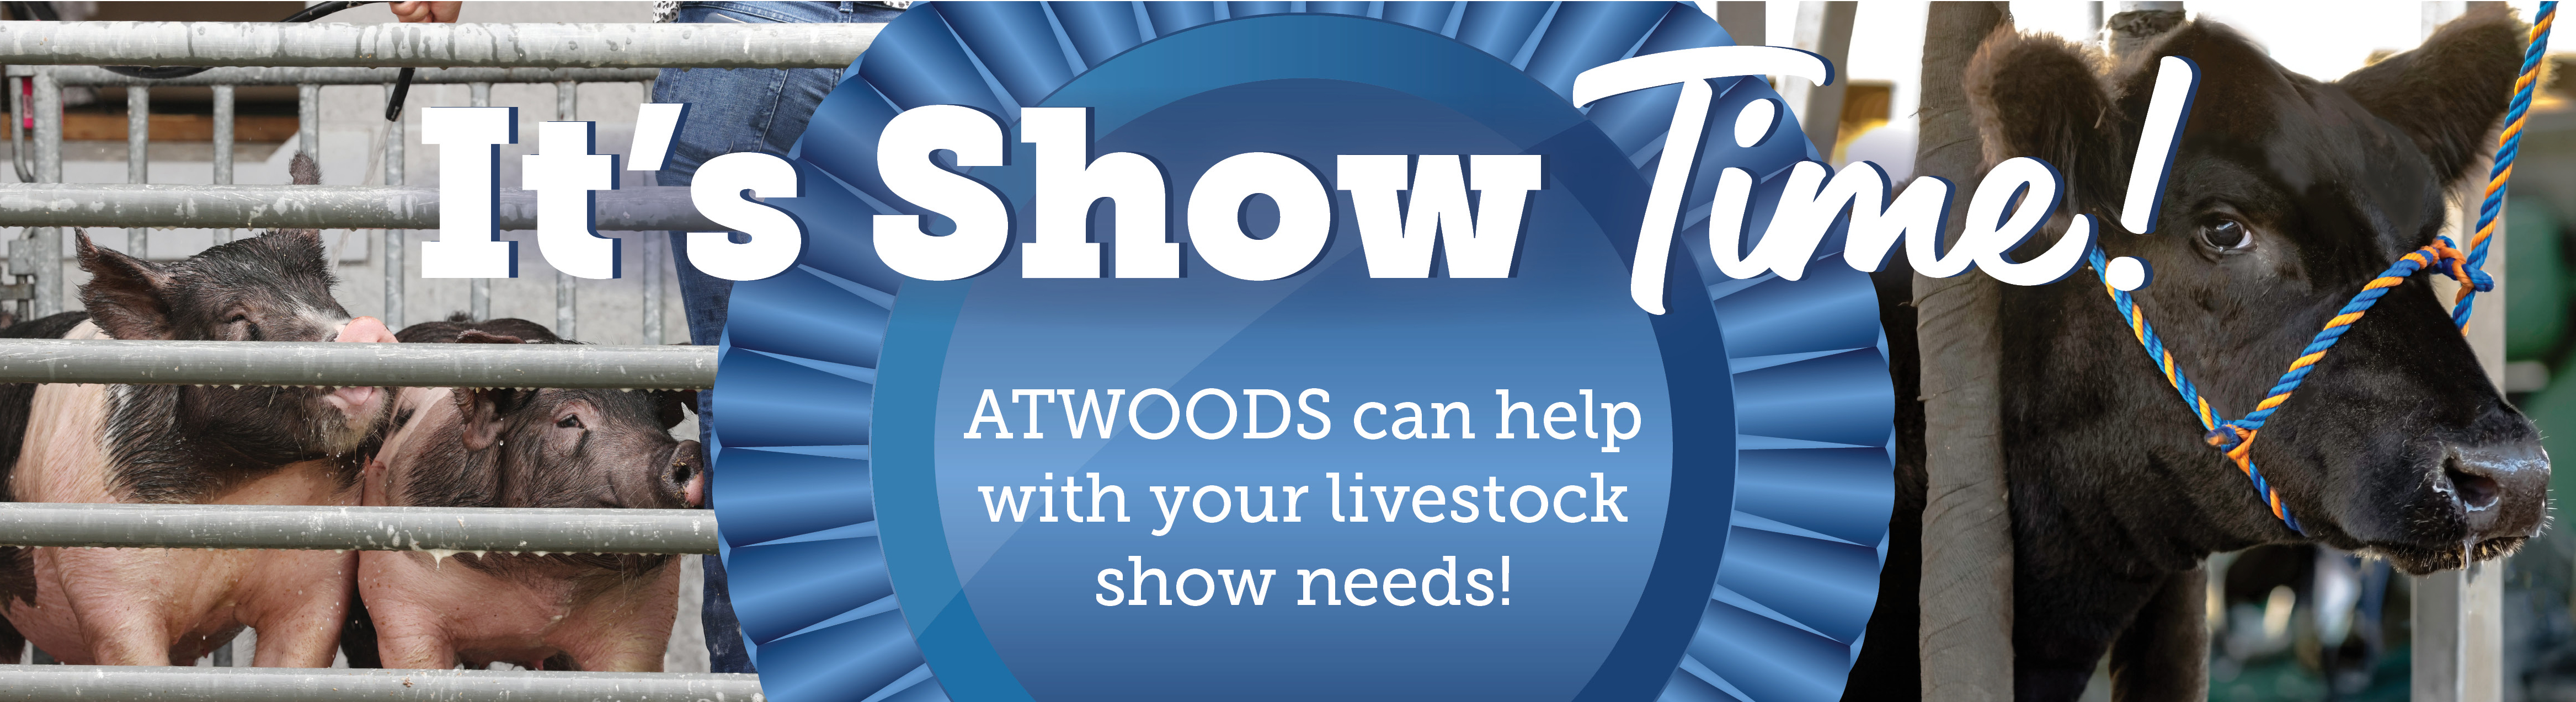 It's Show Time! Atwoods can help with your livestock show needs!